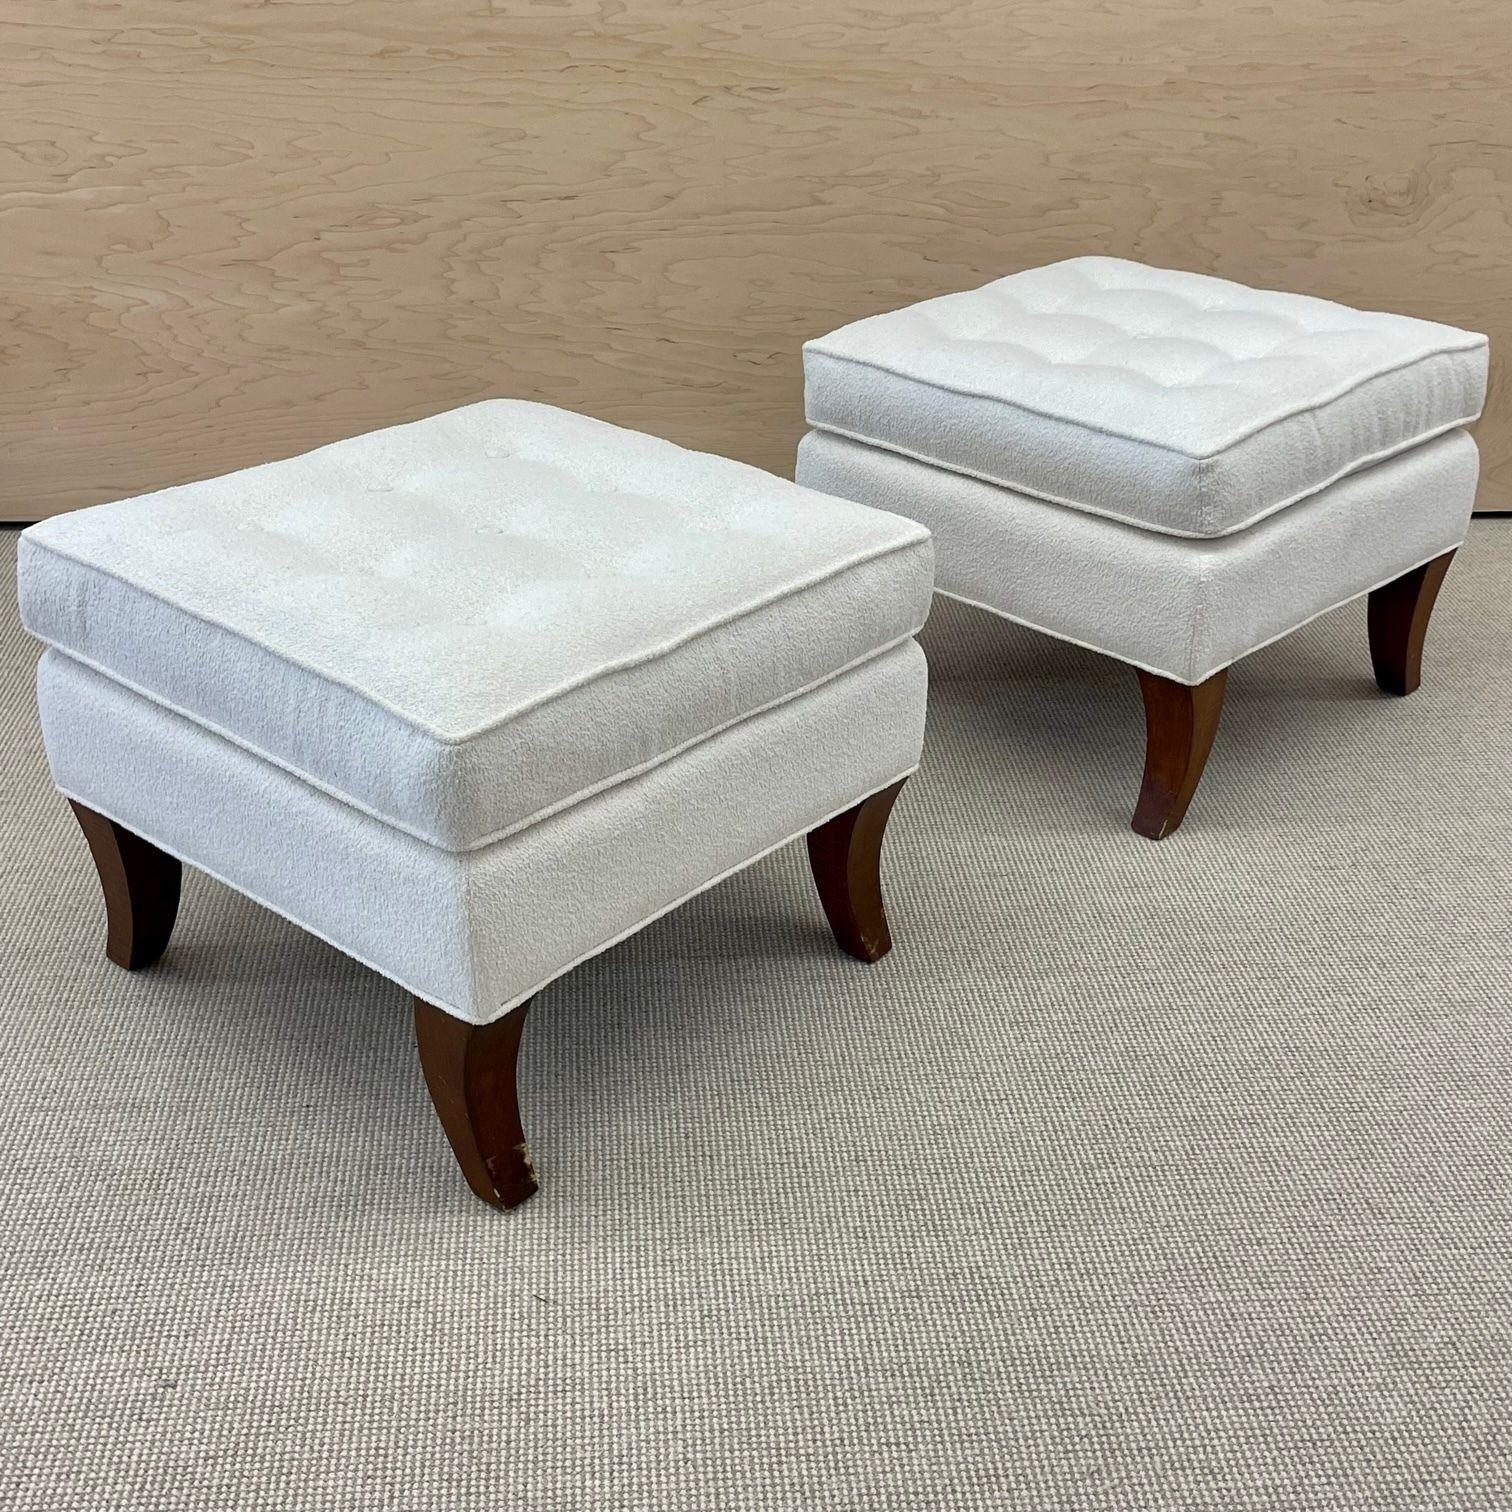 Mid-Century Modern American Designer Tufted Ottomans, Stools, Footstools Walnut, Bouclé

Pair of Mid-Century stools or ottomans by an unknown American designer having organic curved walnut legs and a new white Bouclé upper. The upper has an